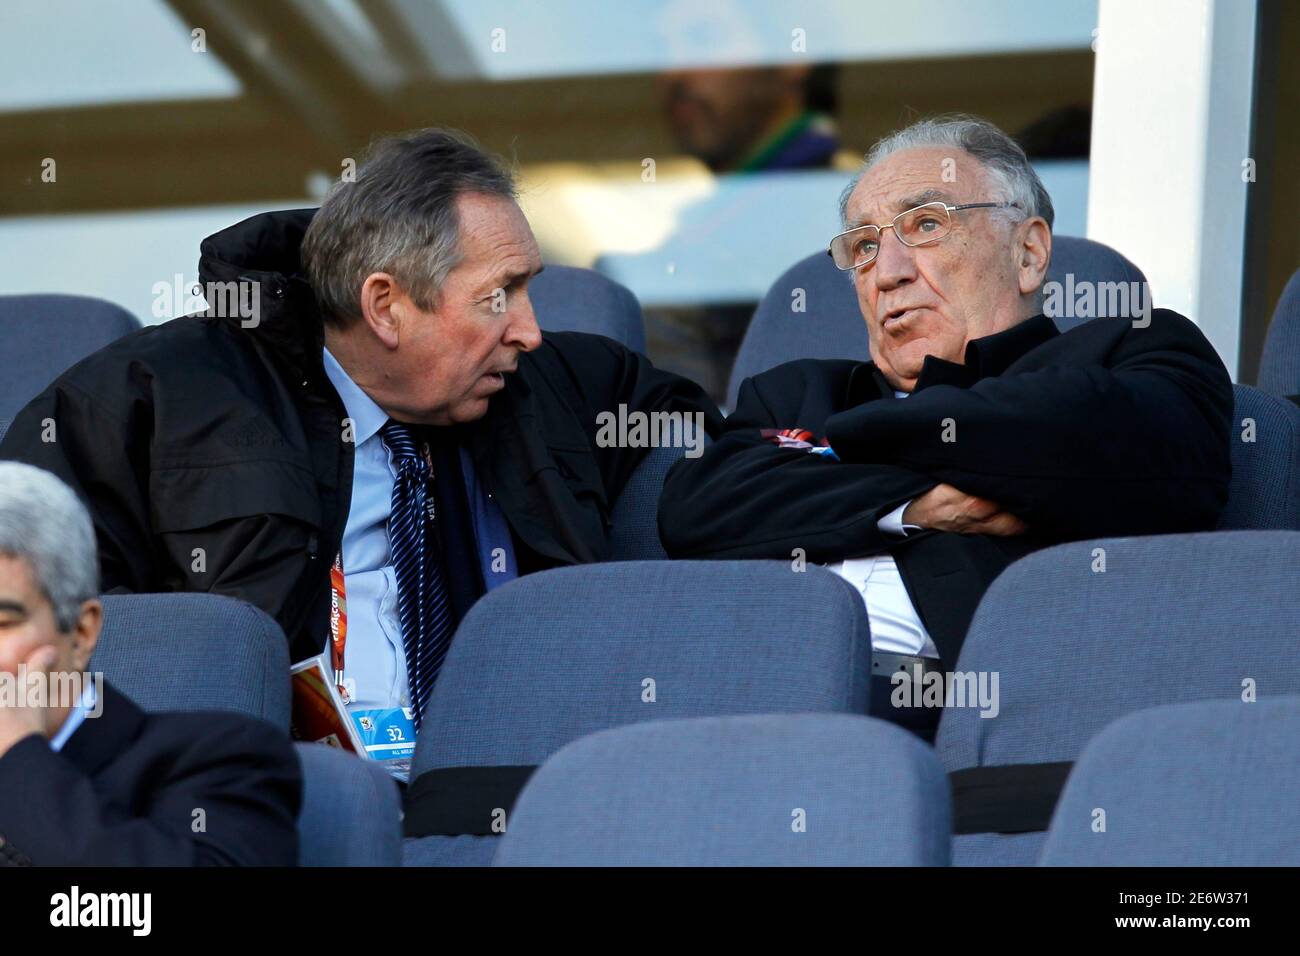 Gerard Houiller, national technical director of French Football Federation  (L) and French Football Federation President Jean-Pierre Escalettes attend  the 2010 World Cup Group A soccer match between France and South Africa at